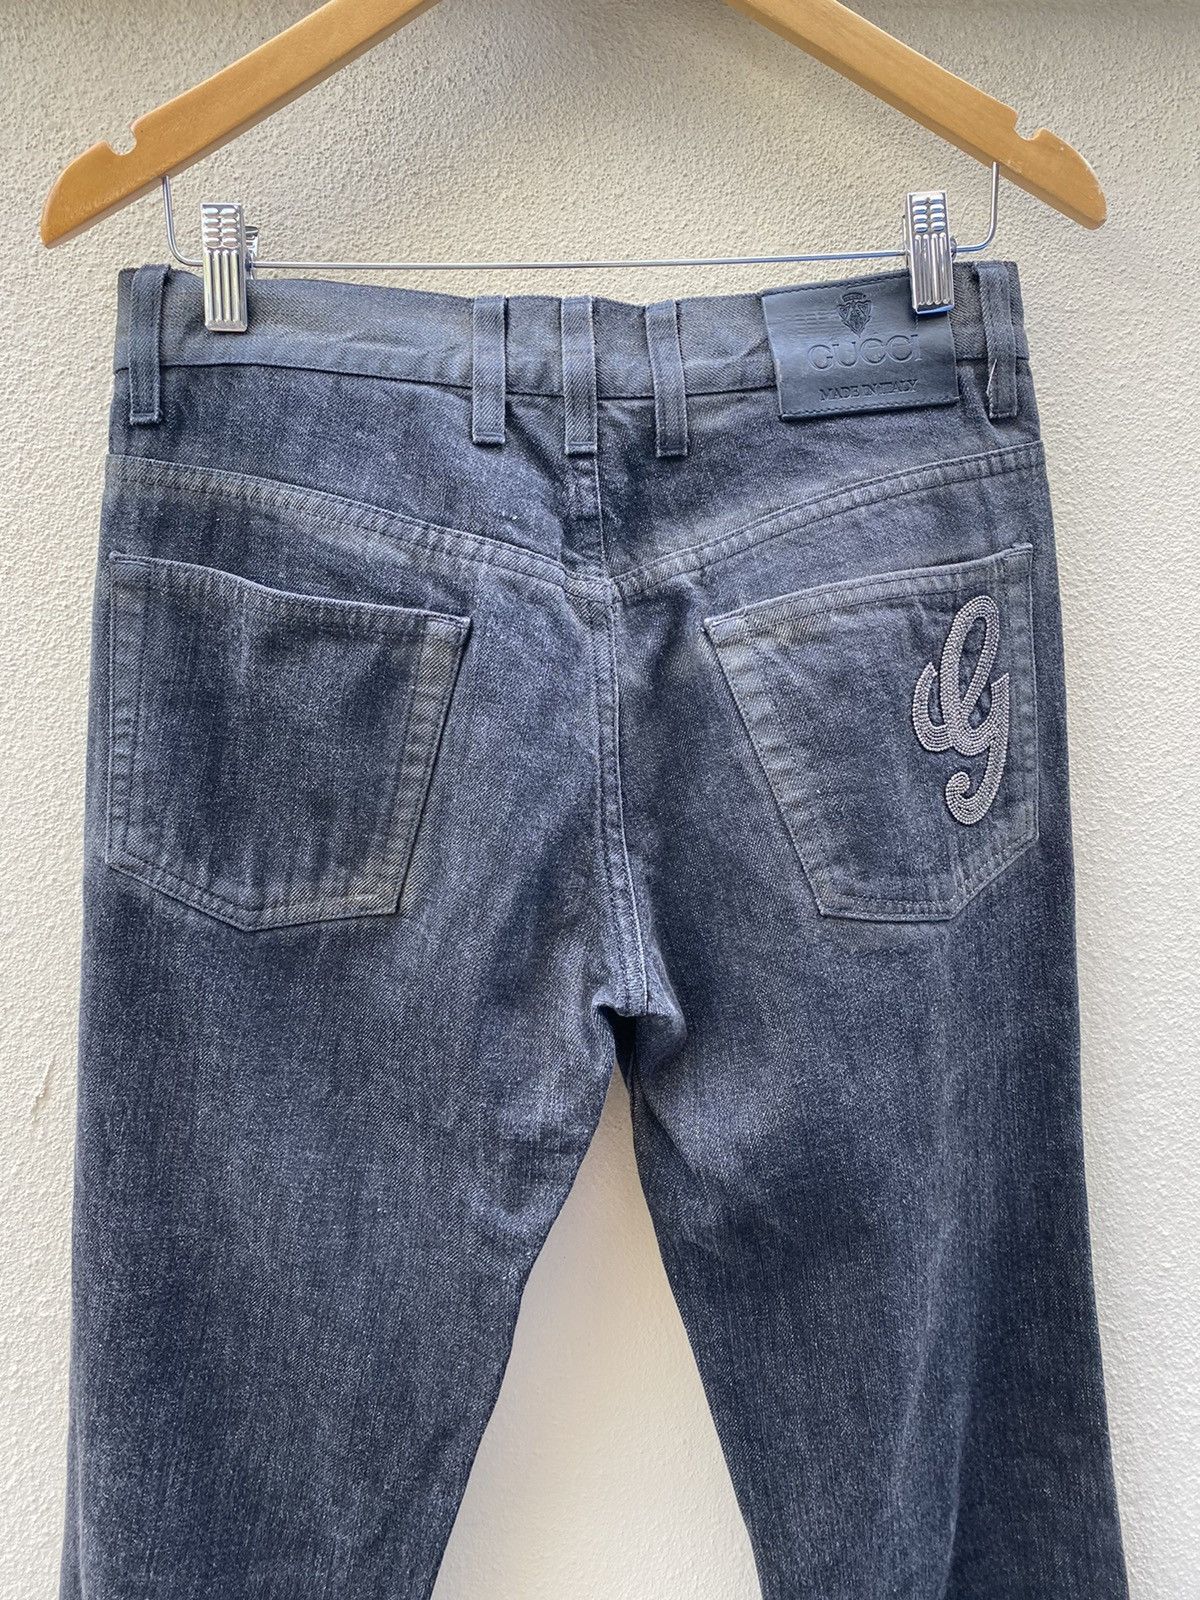 GUCCI Straight Cut Jeans Made in Italy - 8